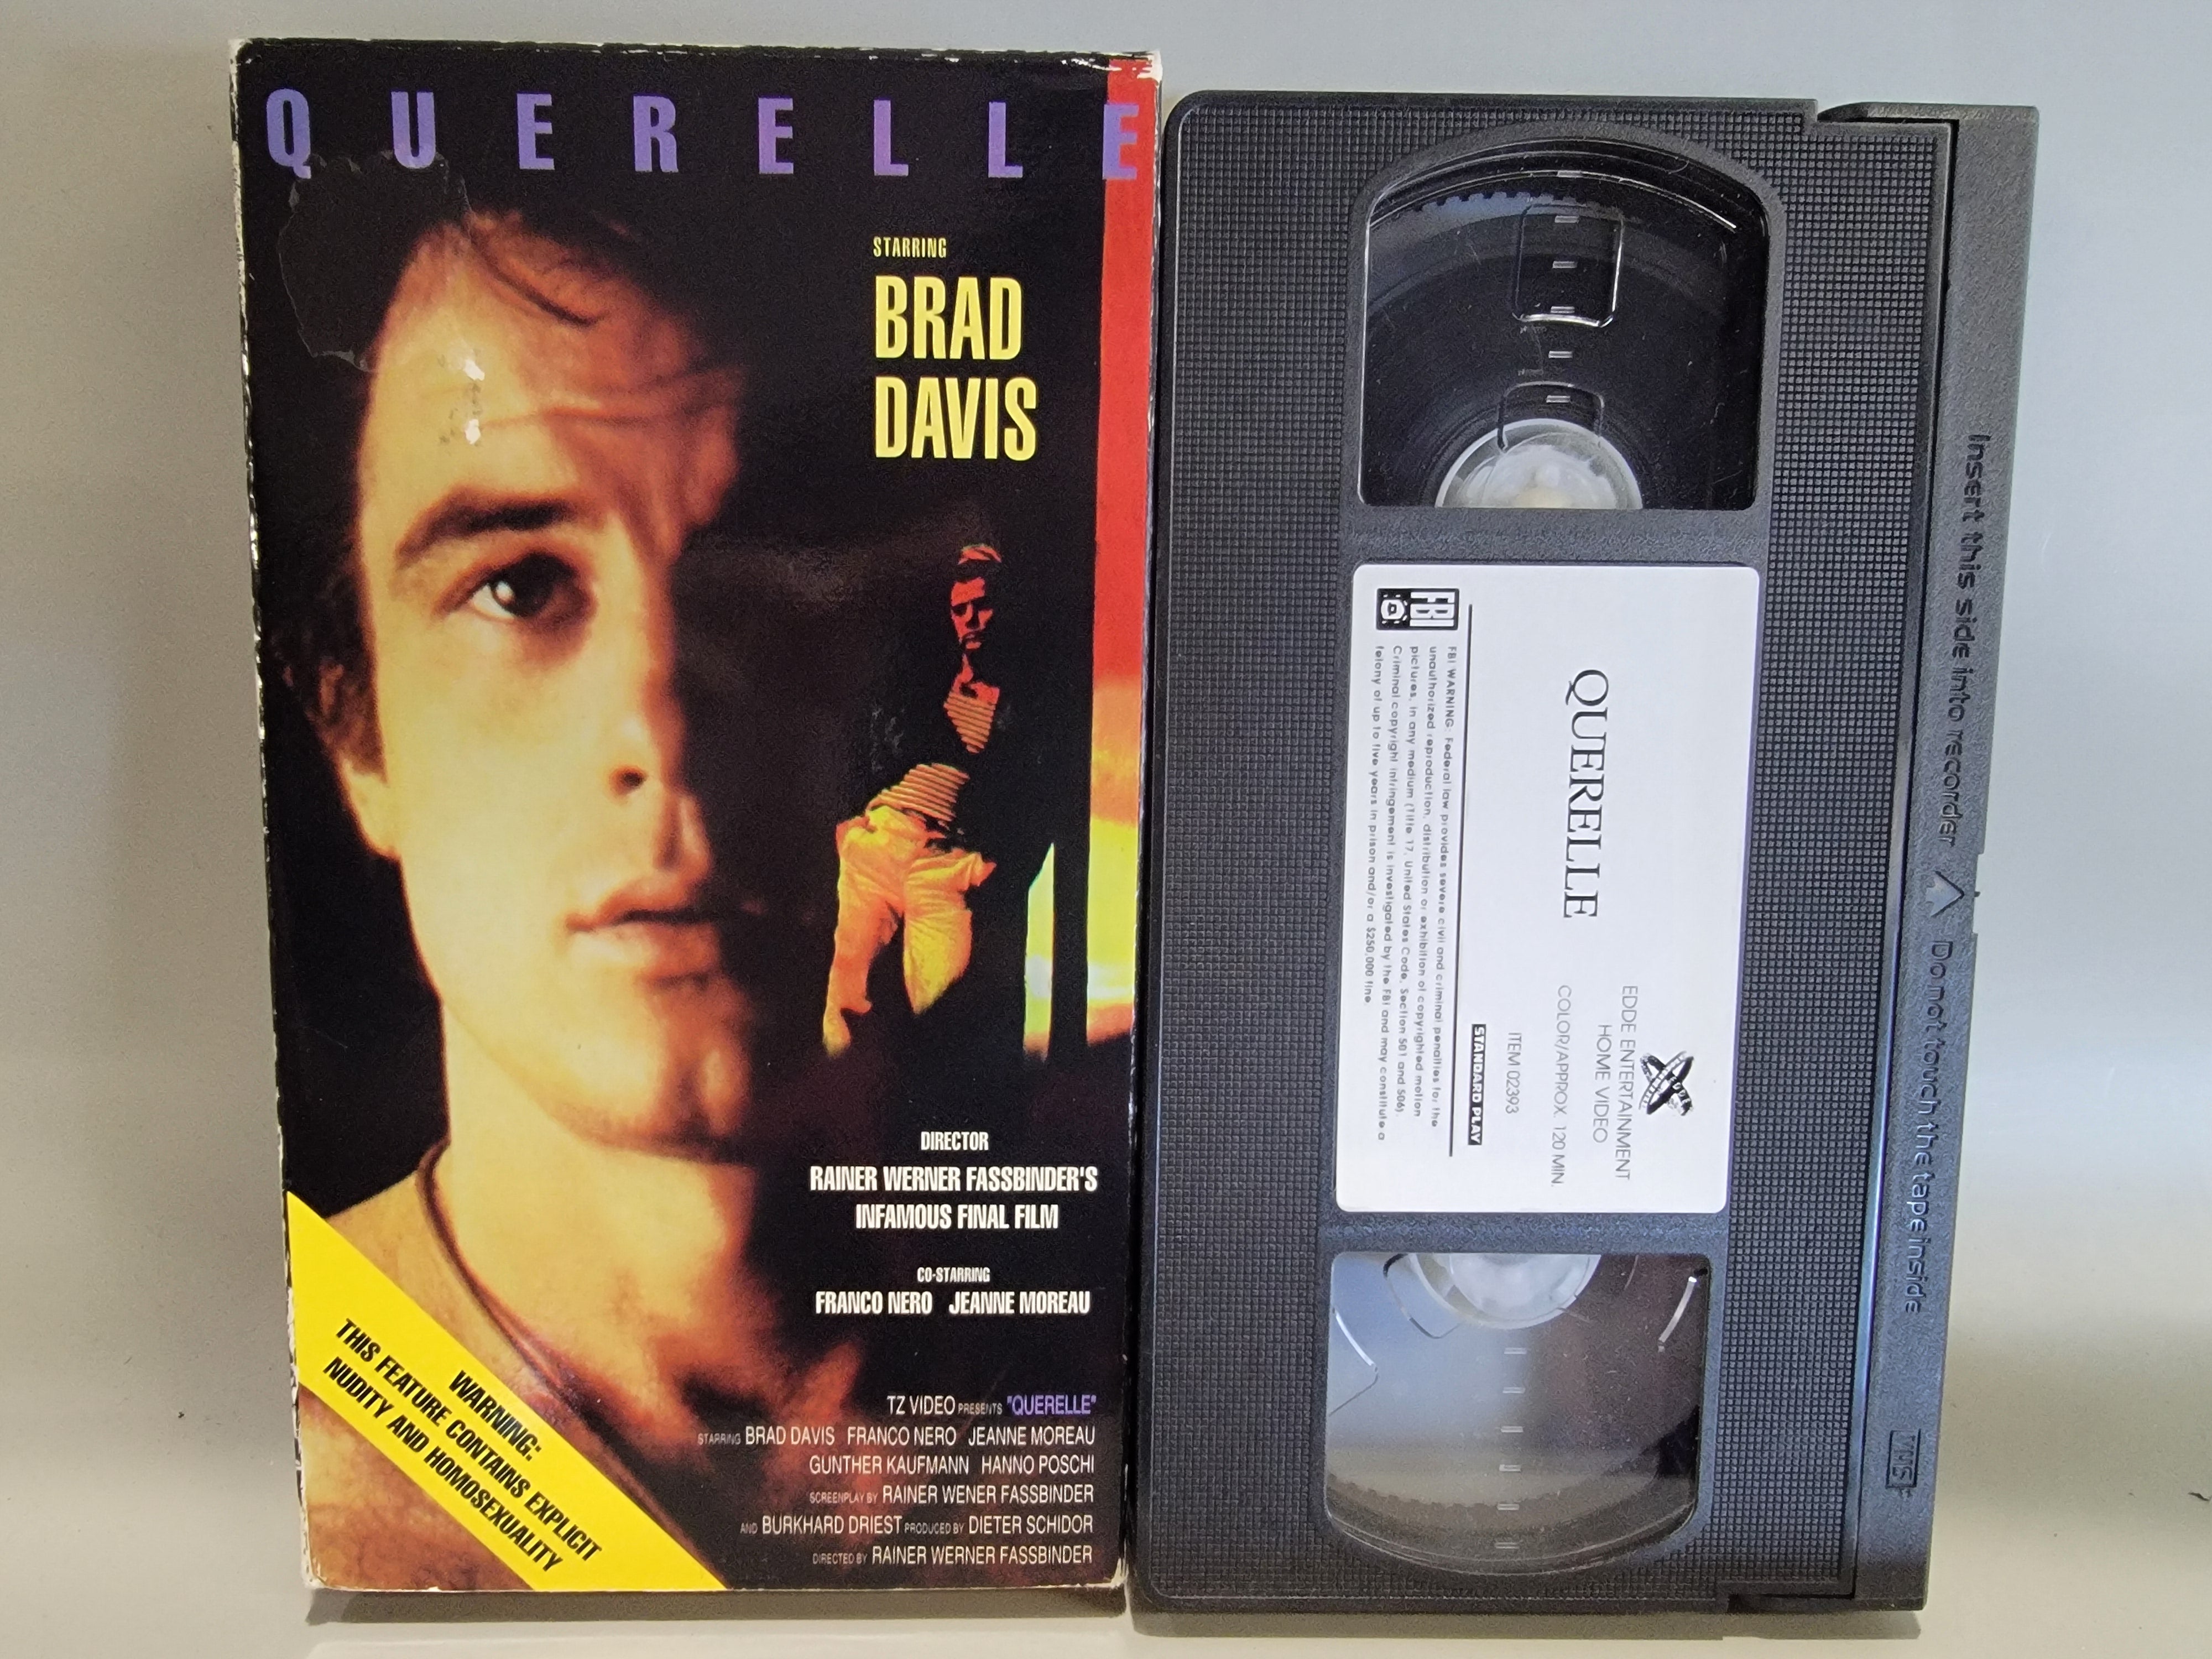 QUERELLE VHS [USED]